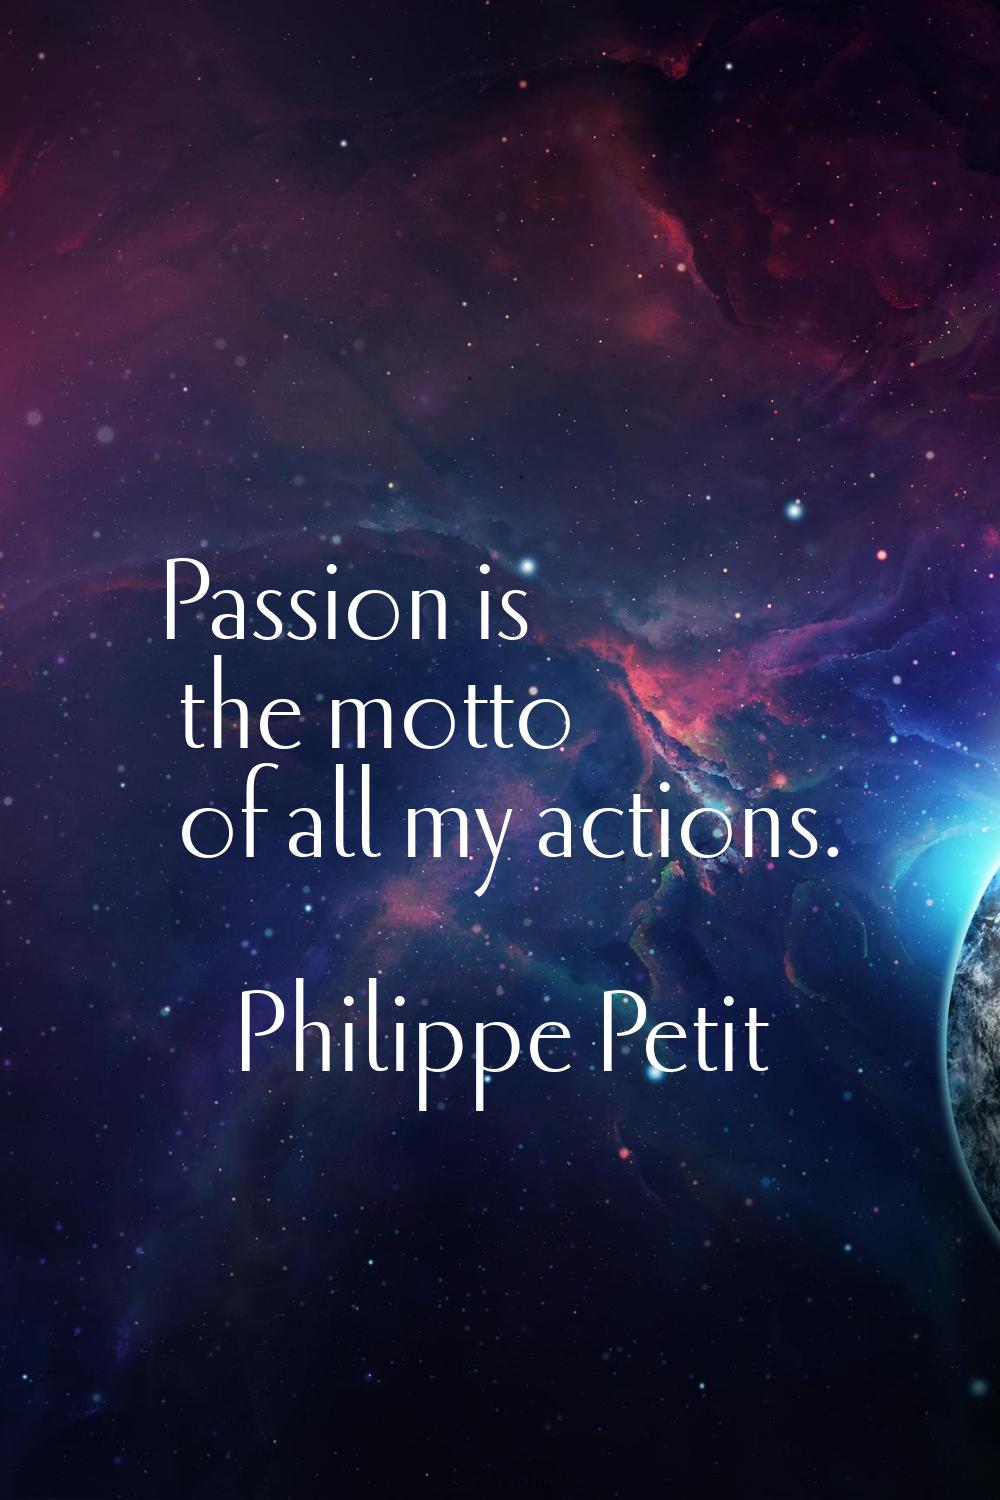 Passion is the motto of all my actions.